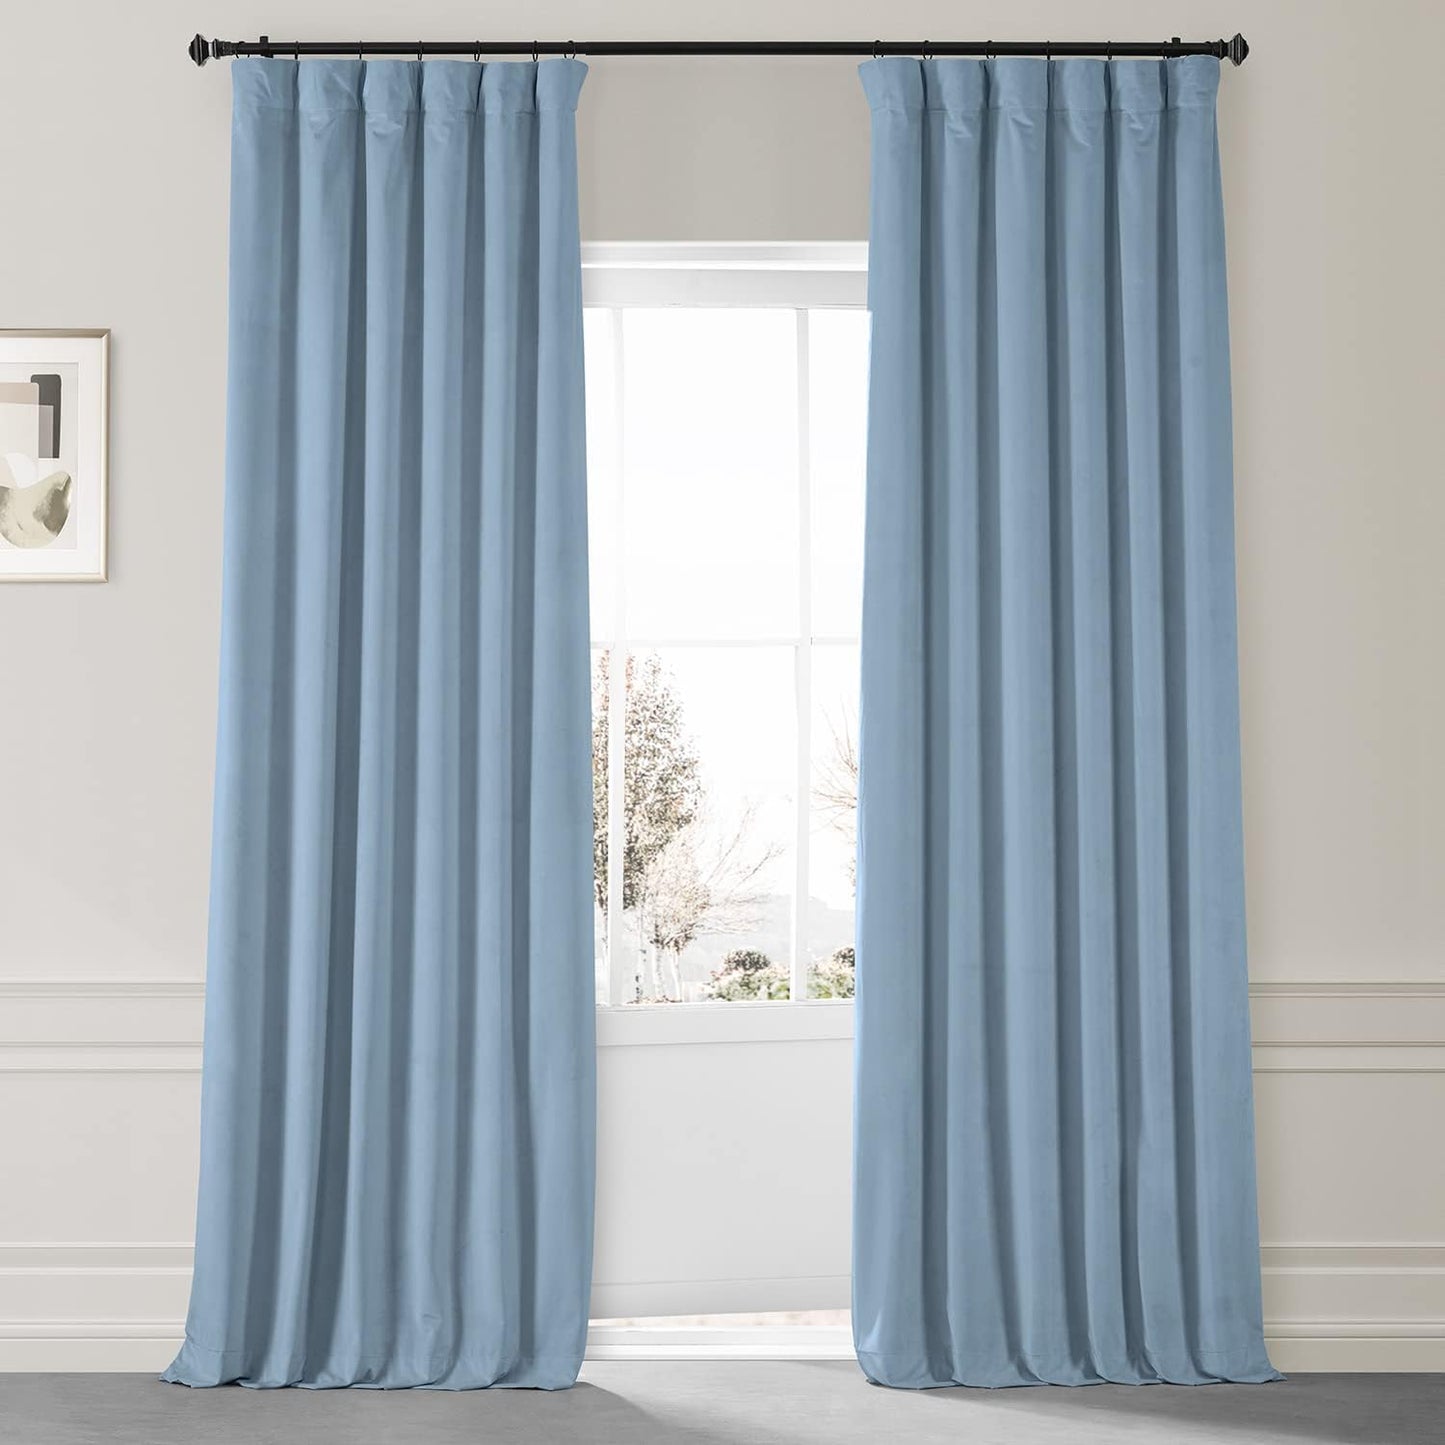 HPD HALF PRICE DRAPES Blackout Solid Thermal Insulated Window Curtain 50 X 96 Signature Plush Velvet Curtains for Bedroom & Living Room (1 Panel), VPYC-SBO198593-96, Diva Cream  Exclusive Fabrics & Furnishings Starry Blue 50 X 108 